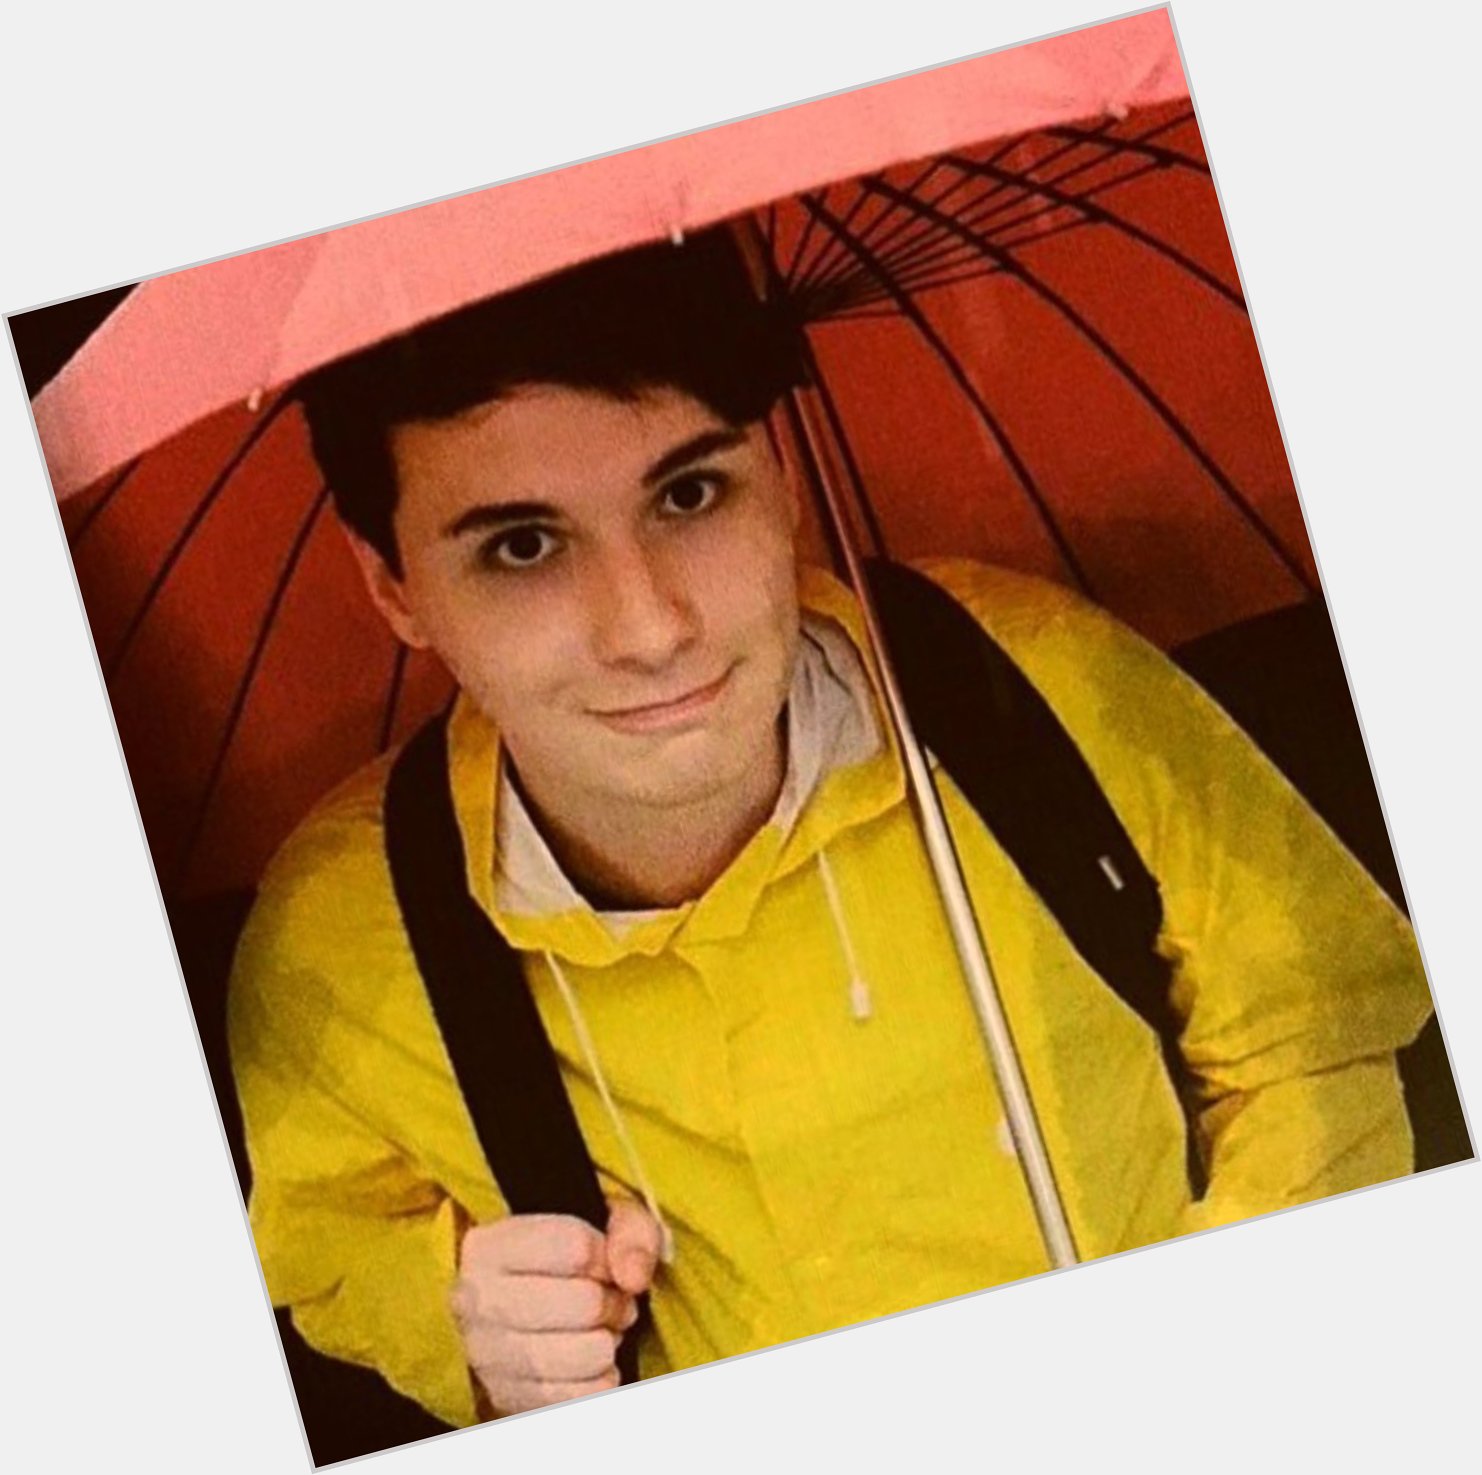  can u wish dan howell a happy birthday and is this dodie yellow 